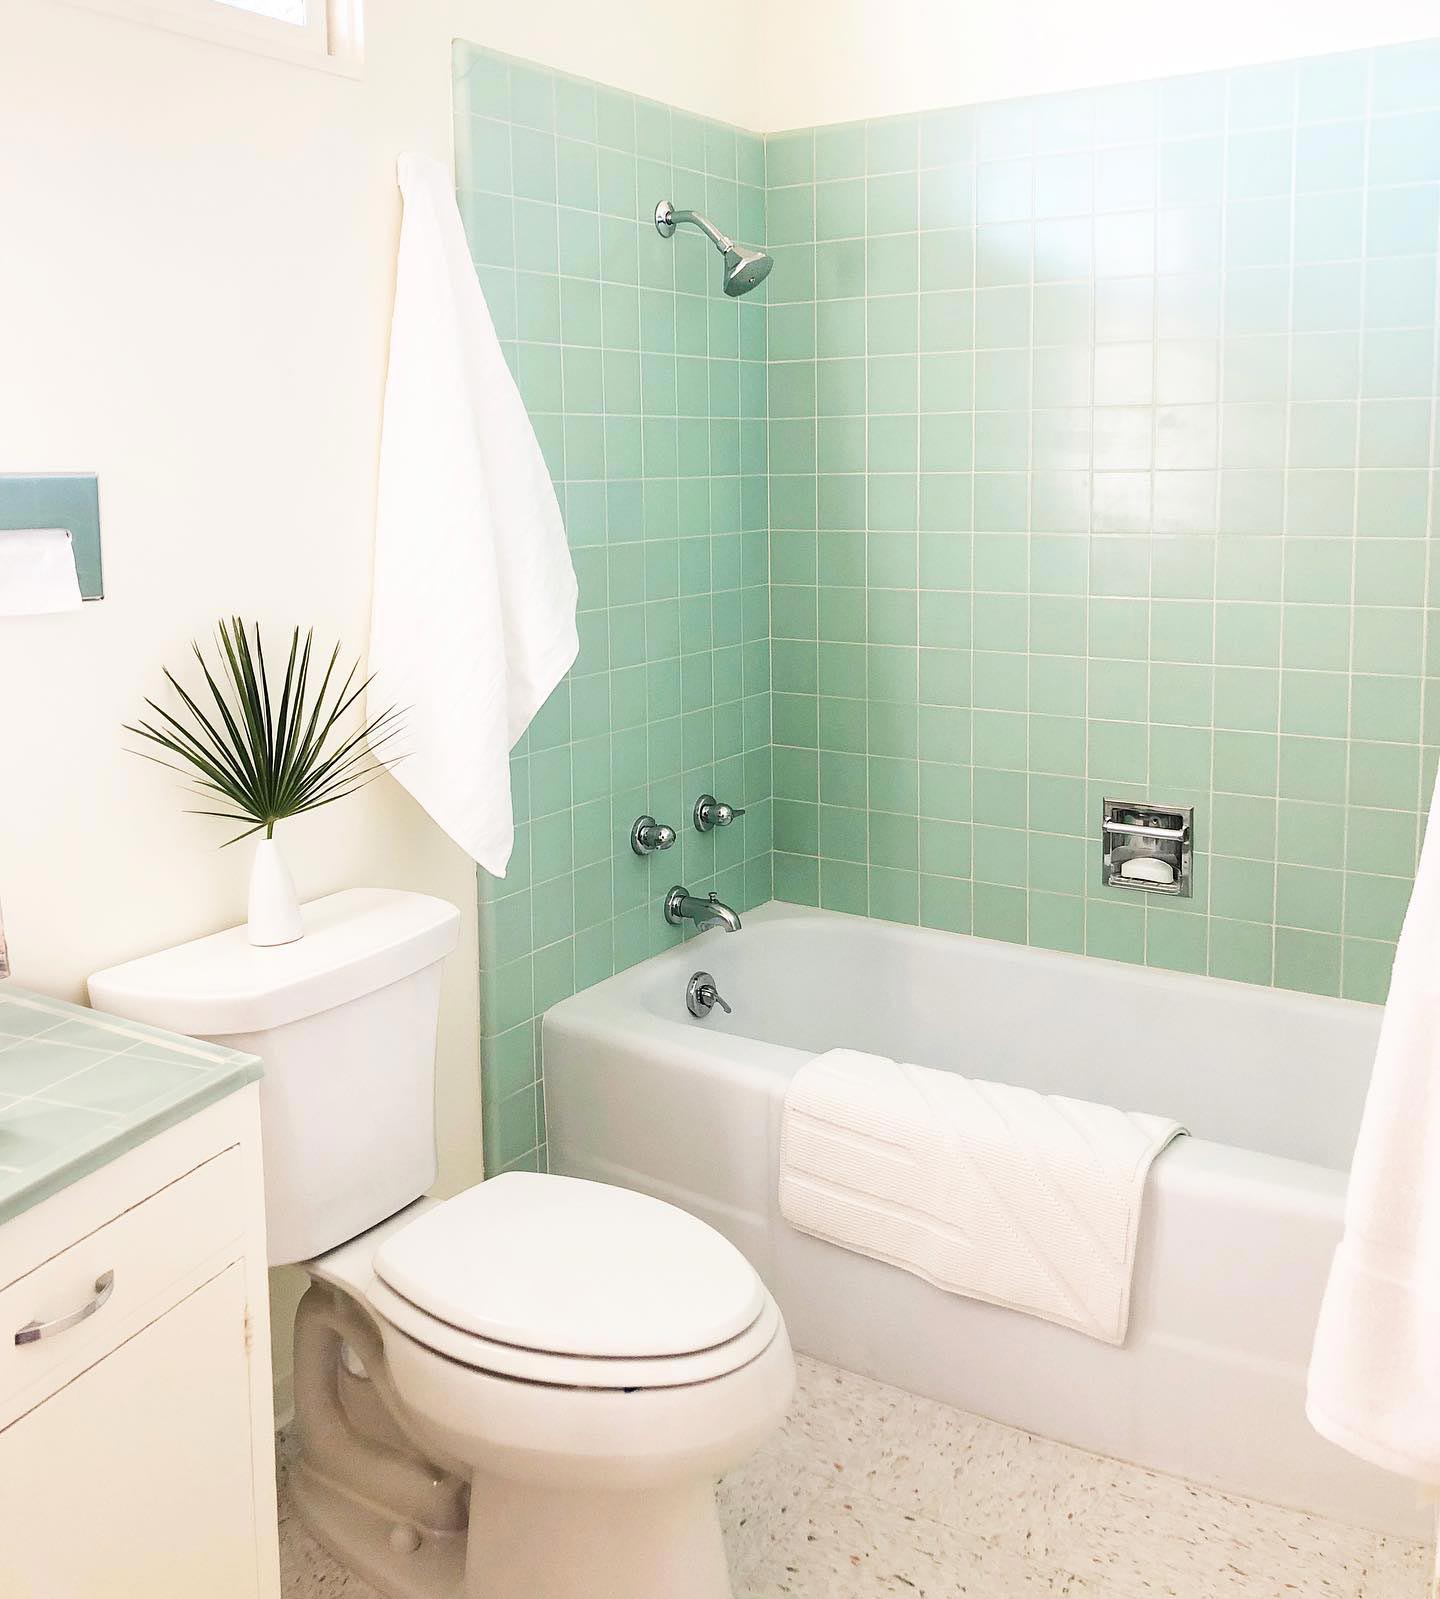 Minty green tiles in the white bathroom